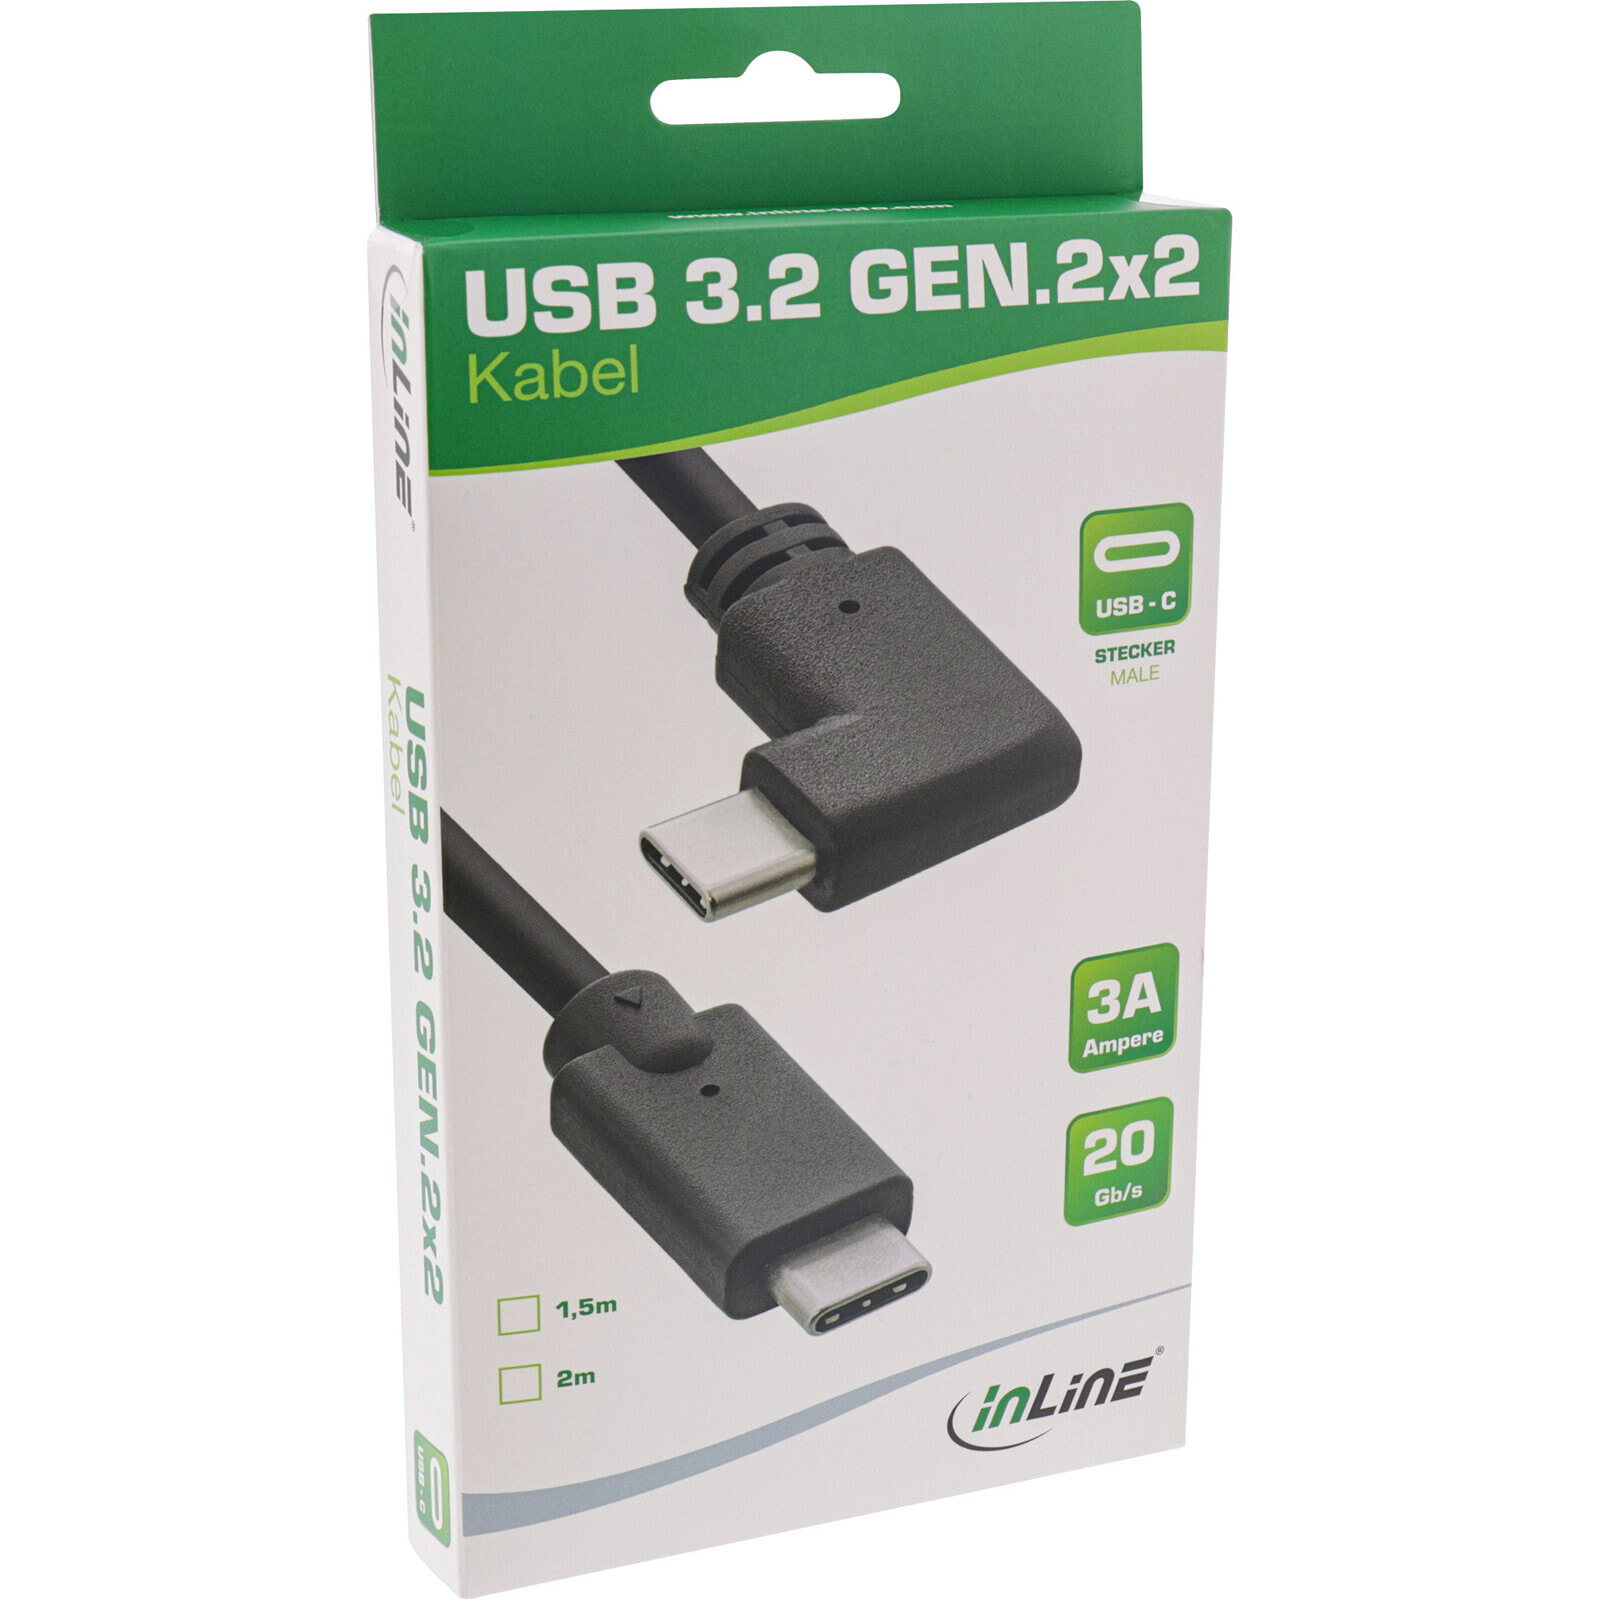 USB 3.2 Gen.2 cable - USB-C male/male angled - black - 1.5m